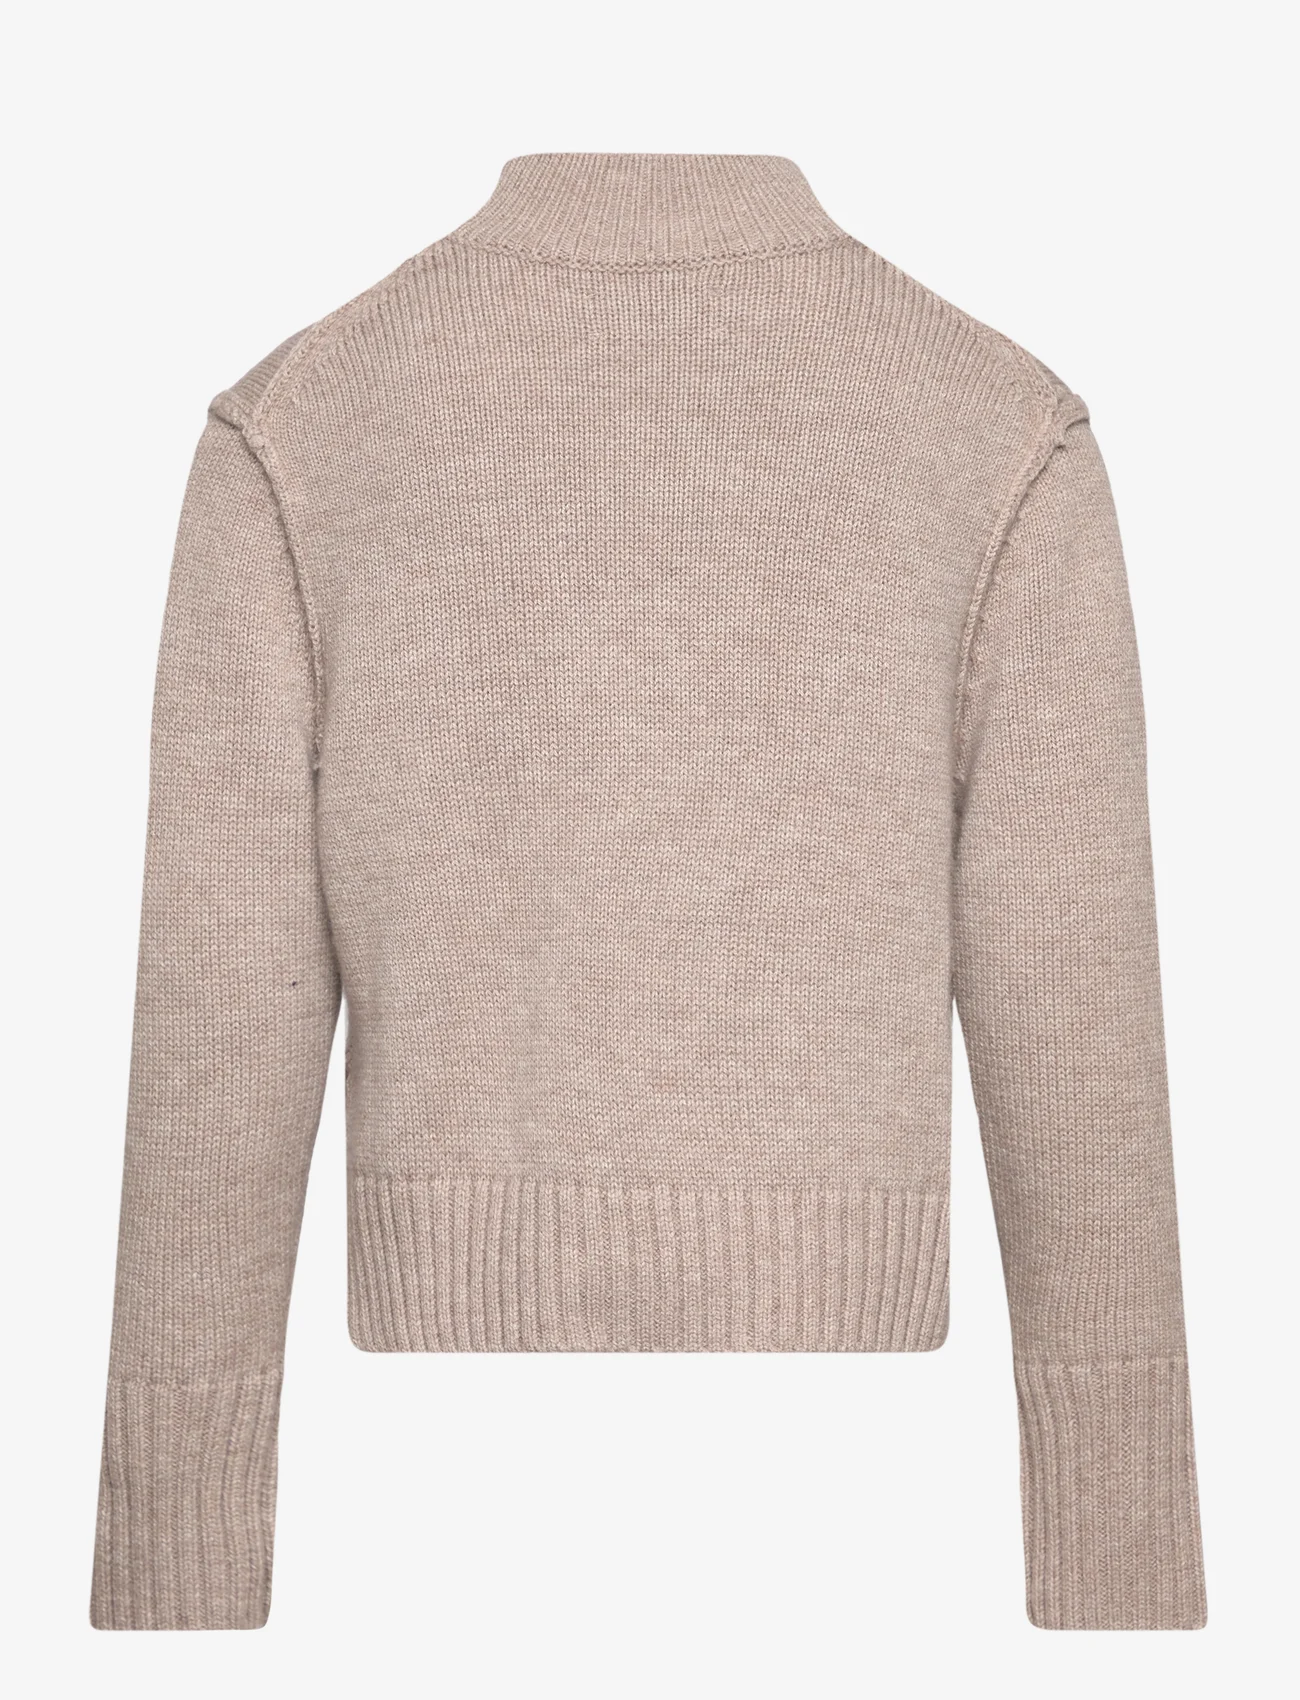 Zadig & Voltaire Kids - POLO NECK SWEATER OR JUMPER - pullover - chine beige - 1